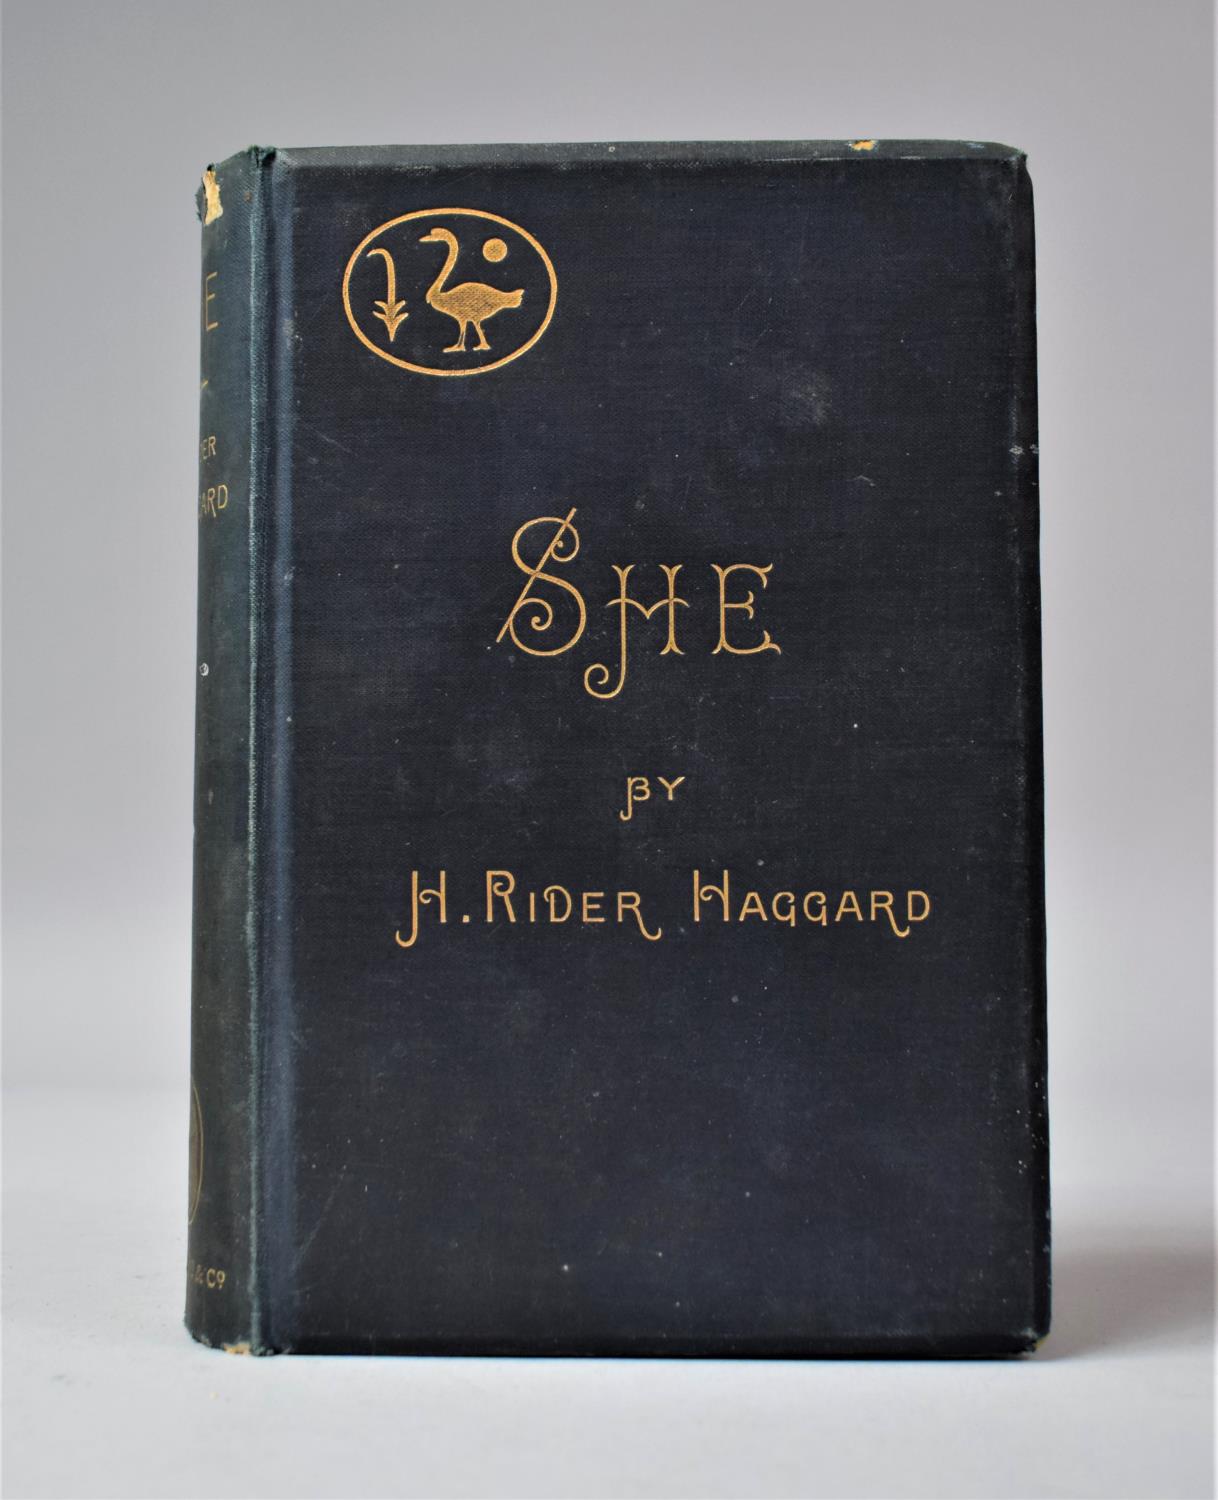 A 1887 Edition of She by H. Rider Haggard, Published by Longmans, Green & Co., London. Condition